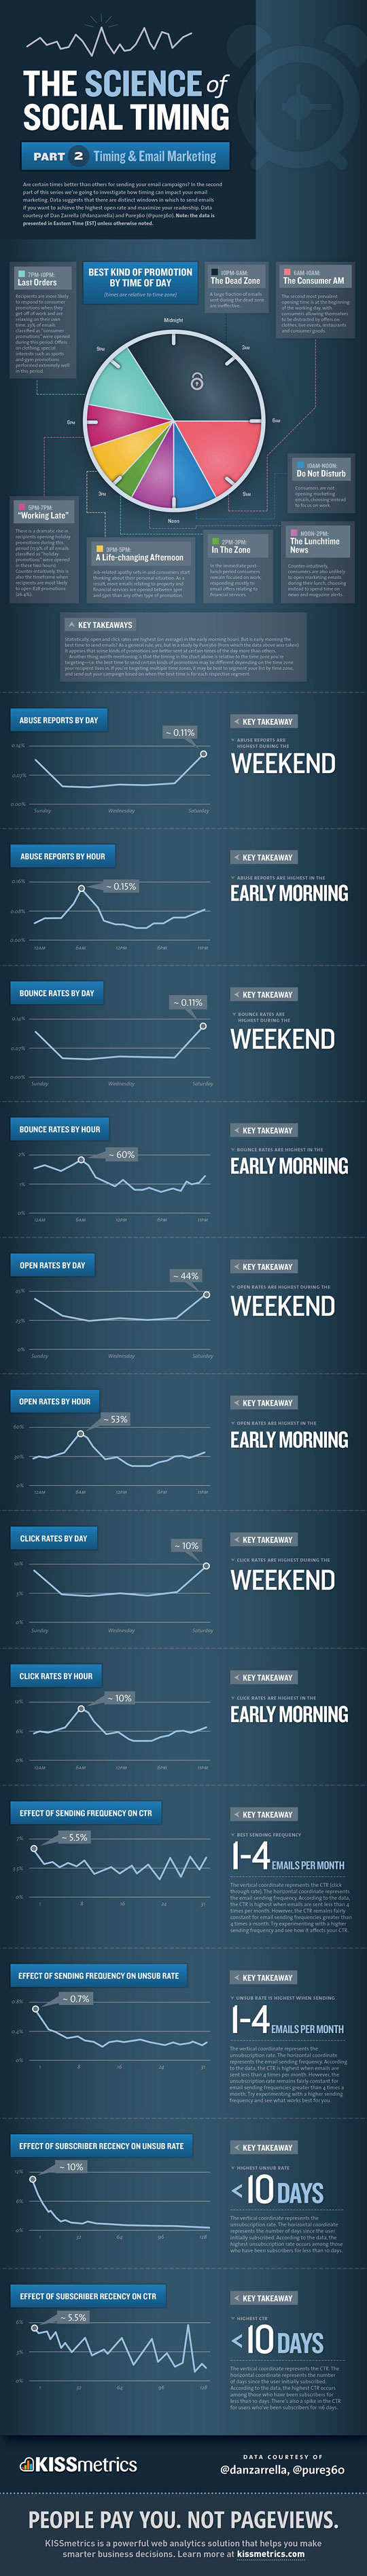 Email Marketing Timing - Click the image for bigger view